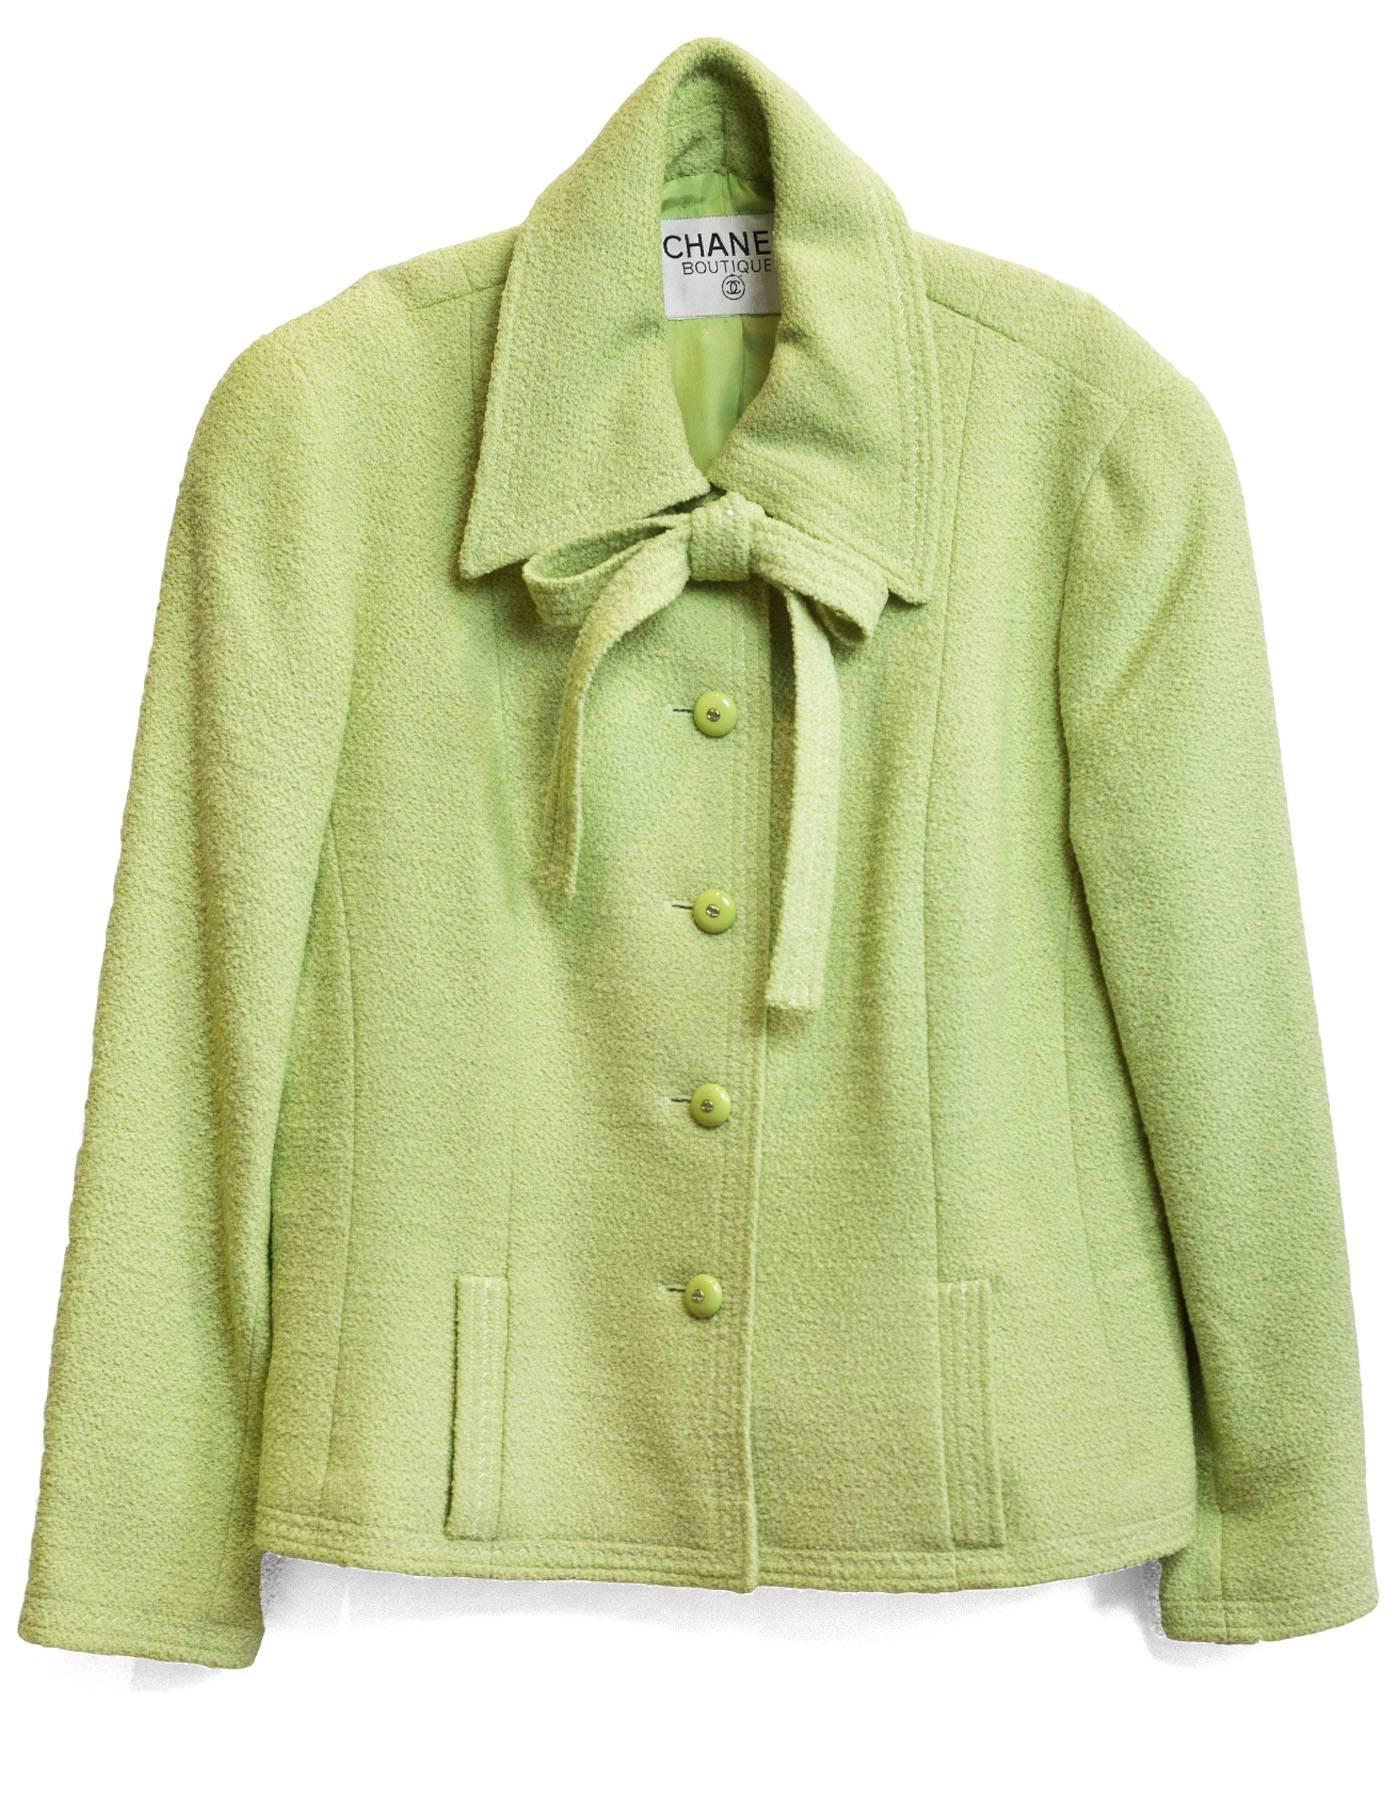 Chanel Chartreuse Boucle Jacket 
Features neck tie

Color: Chartreuse green
Composition: Not given- believed to be a wool blend
Lining: Chartreuse silk-blend
Closure/Opening: Button down front
Exterior Pockets: Two front pockets
Interior Pockets: